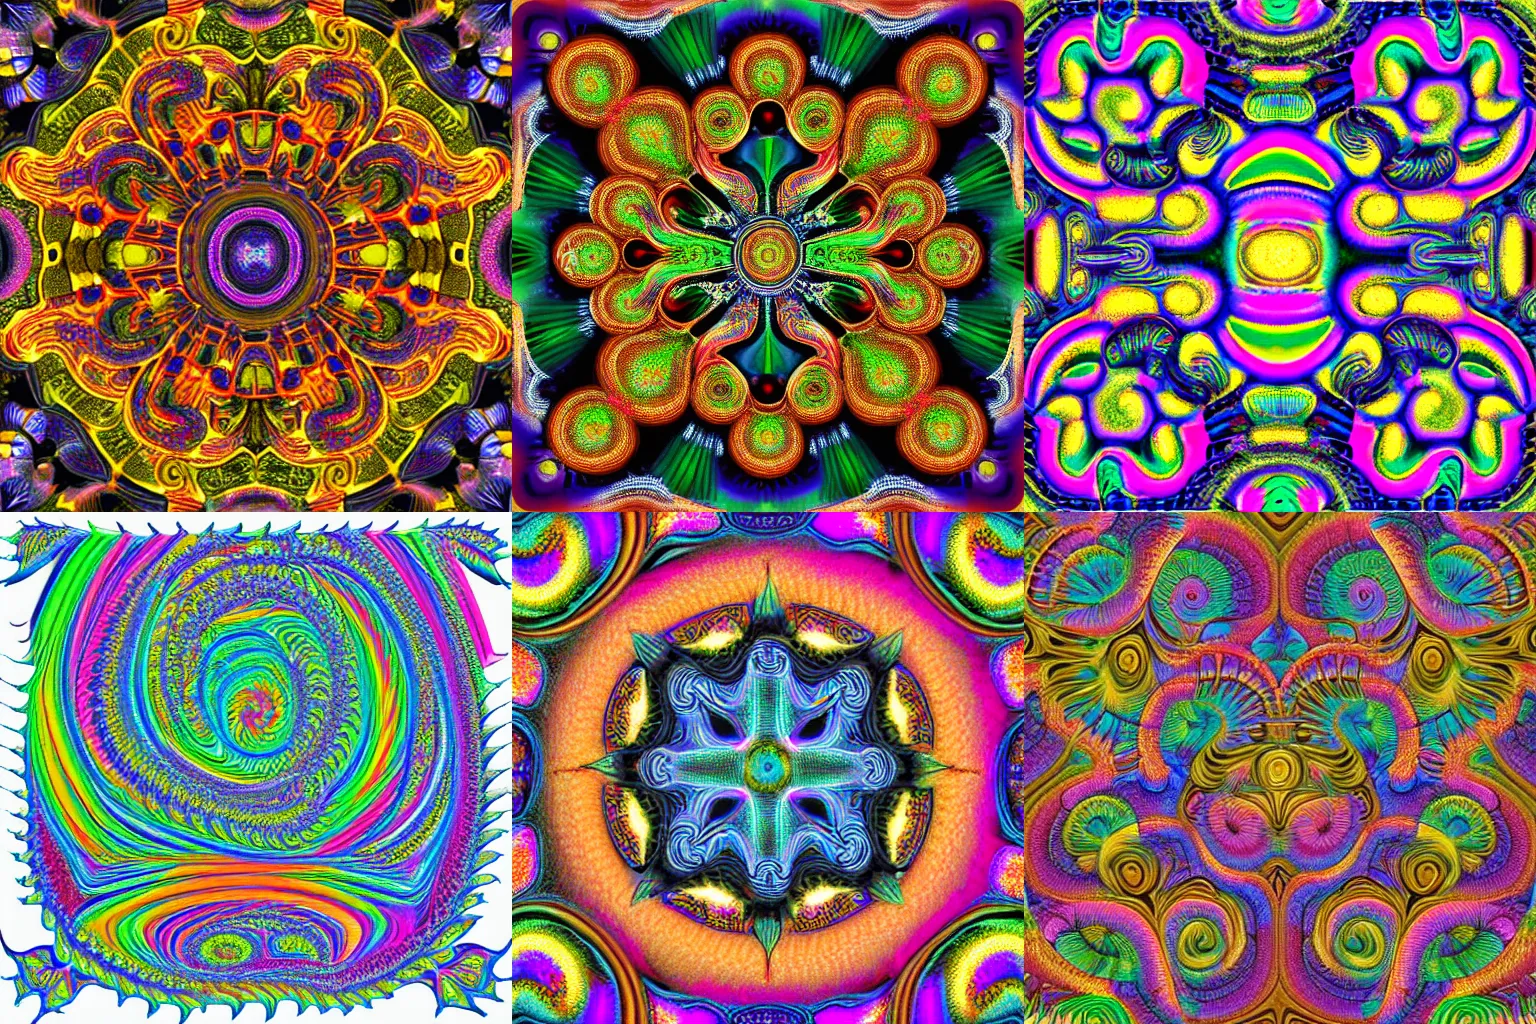 Prompt: haeckel embossed bumpy maze fractal organic colorful